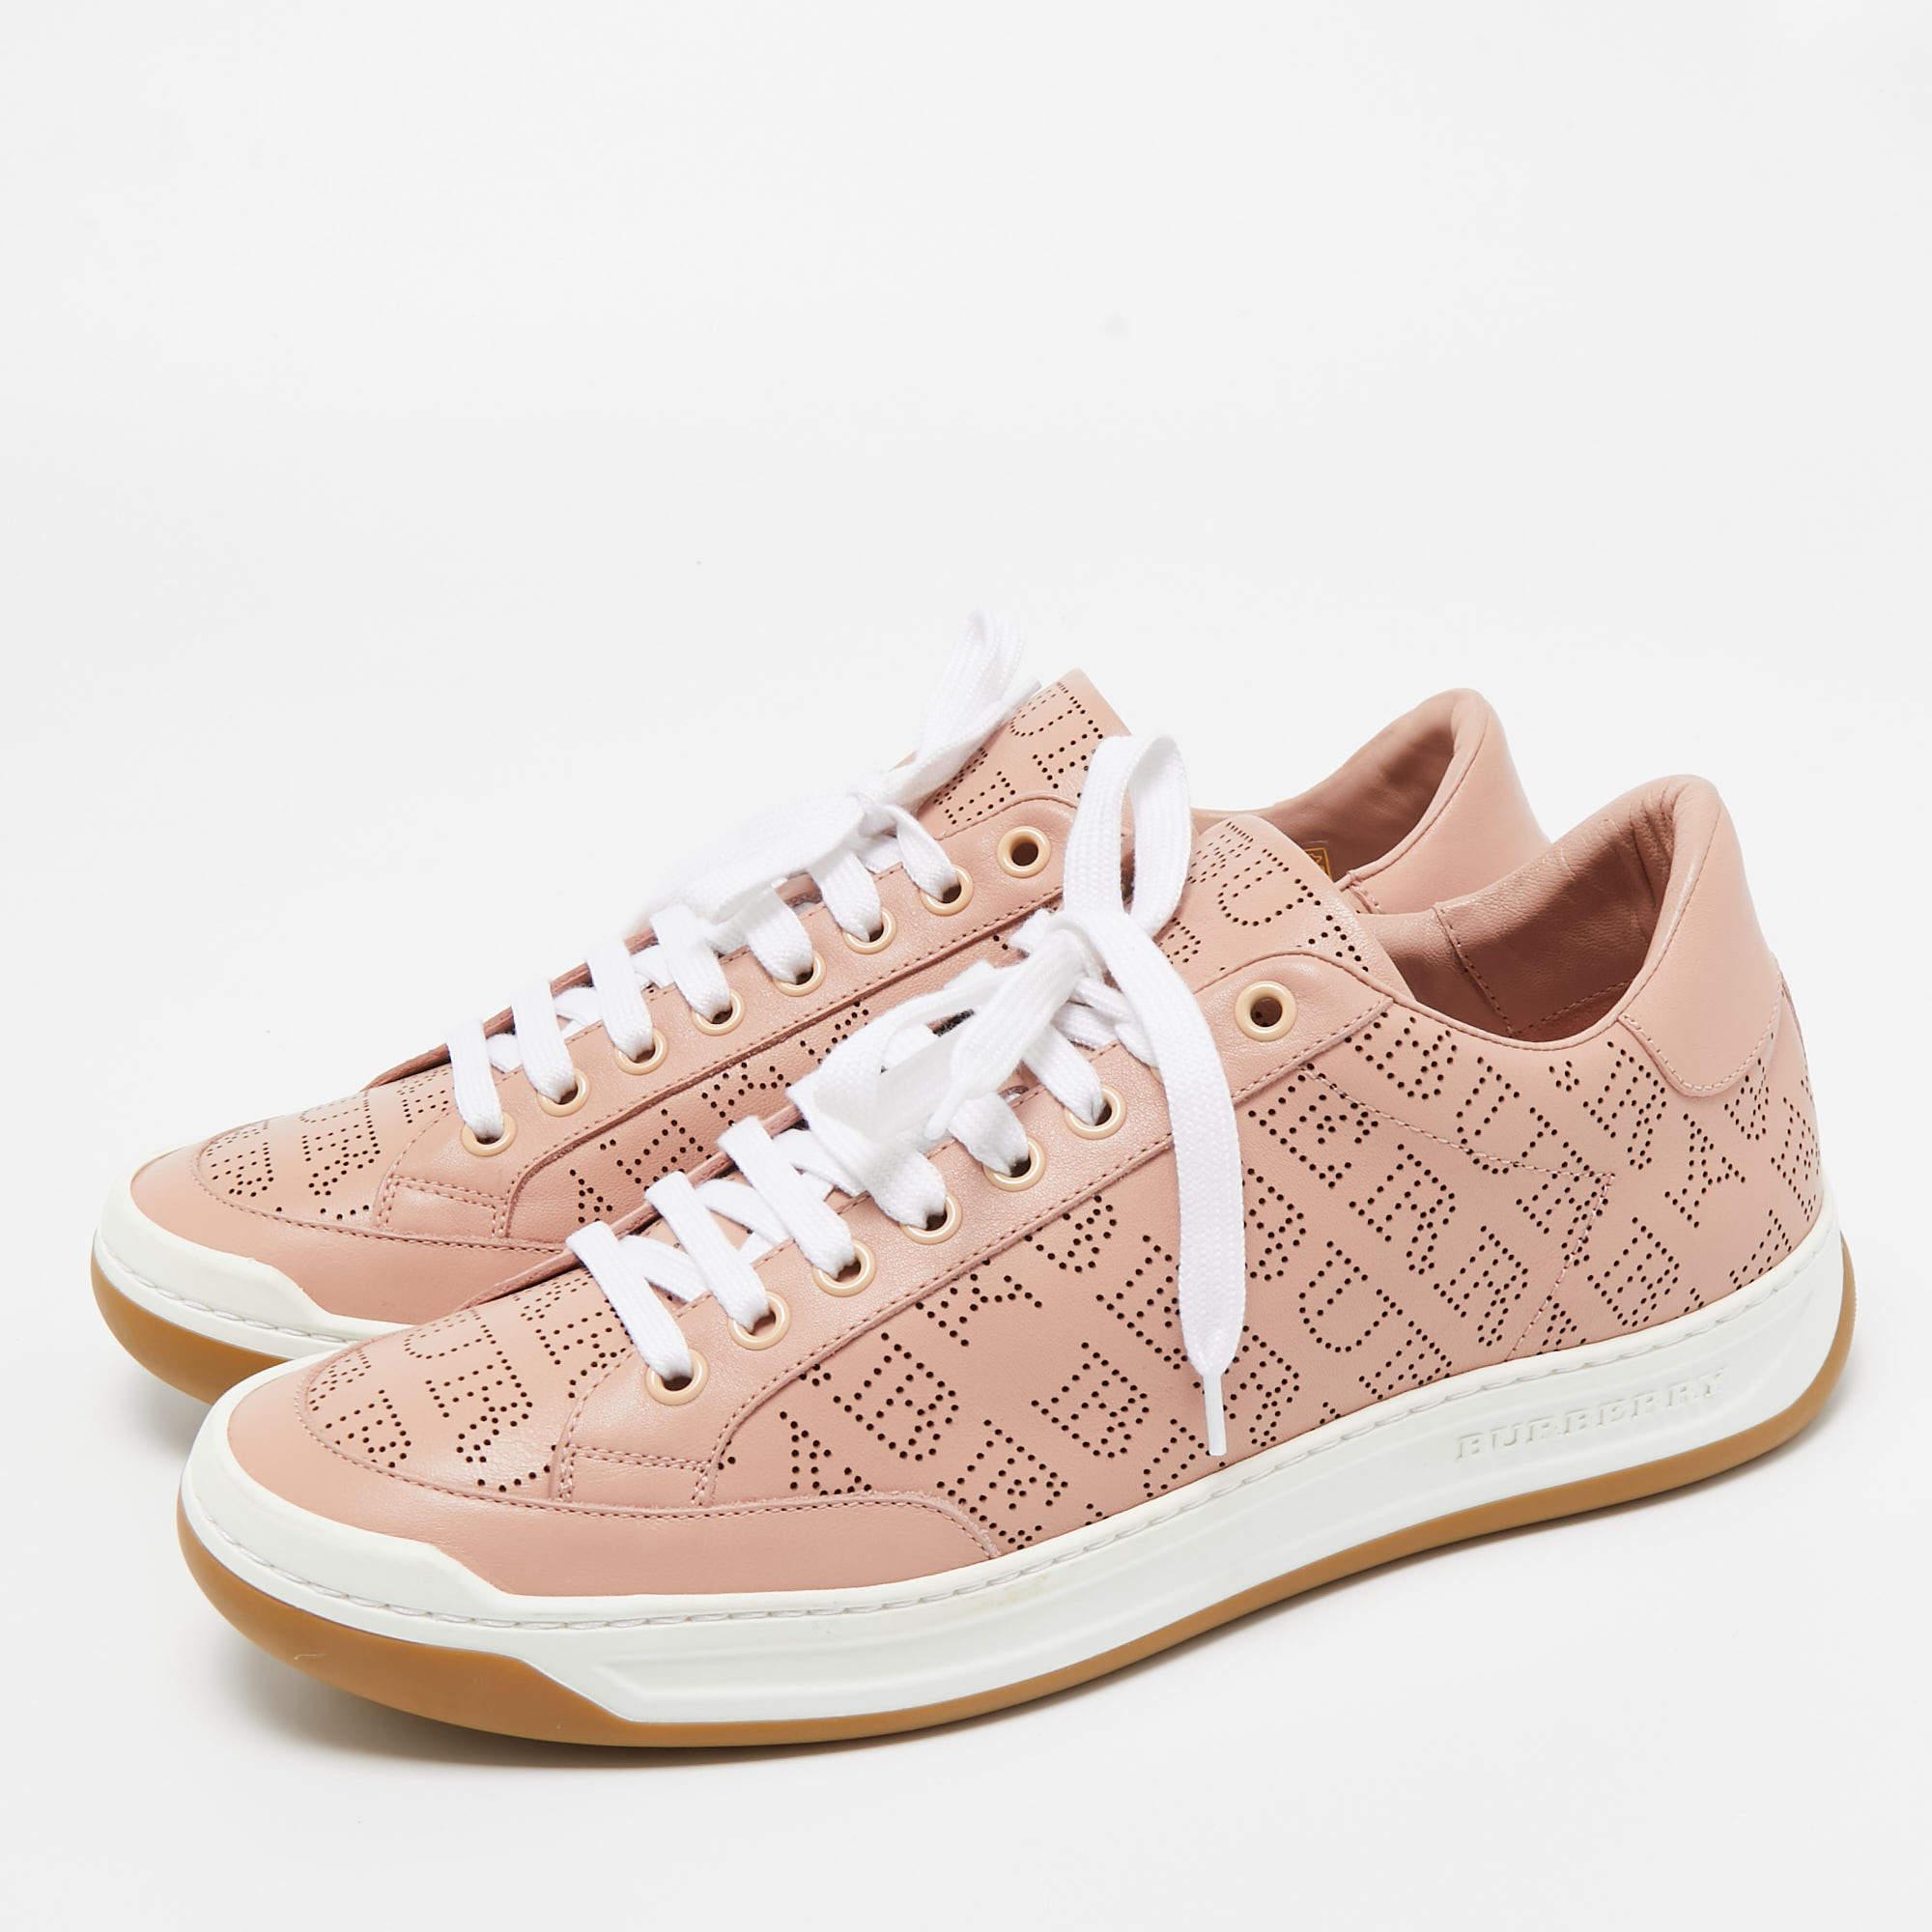 Burberry Pink Leather Westford Low Top Sneakers Size 41 1